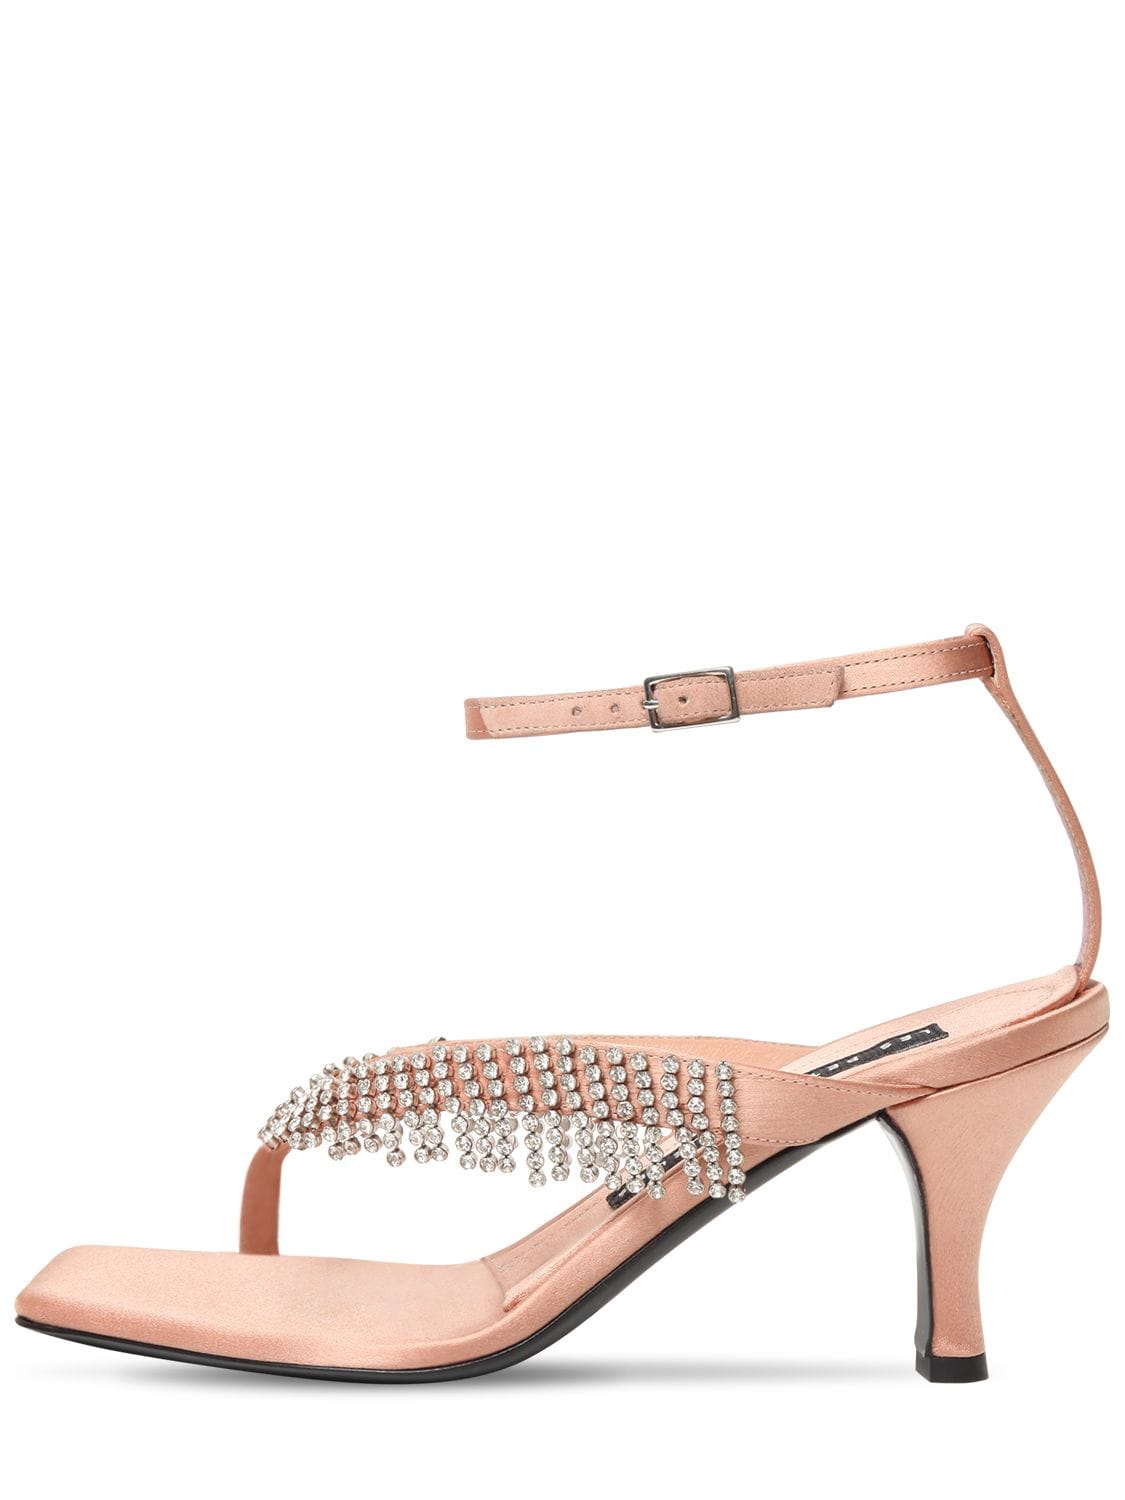 Les Petits Joueurs 70mm Ardith Satin & Crystals Sandals In Blush